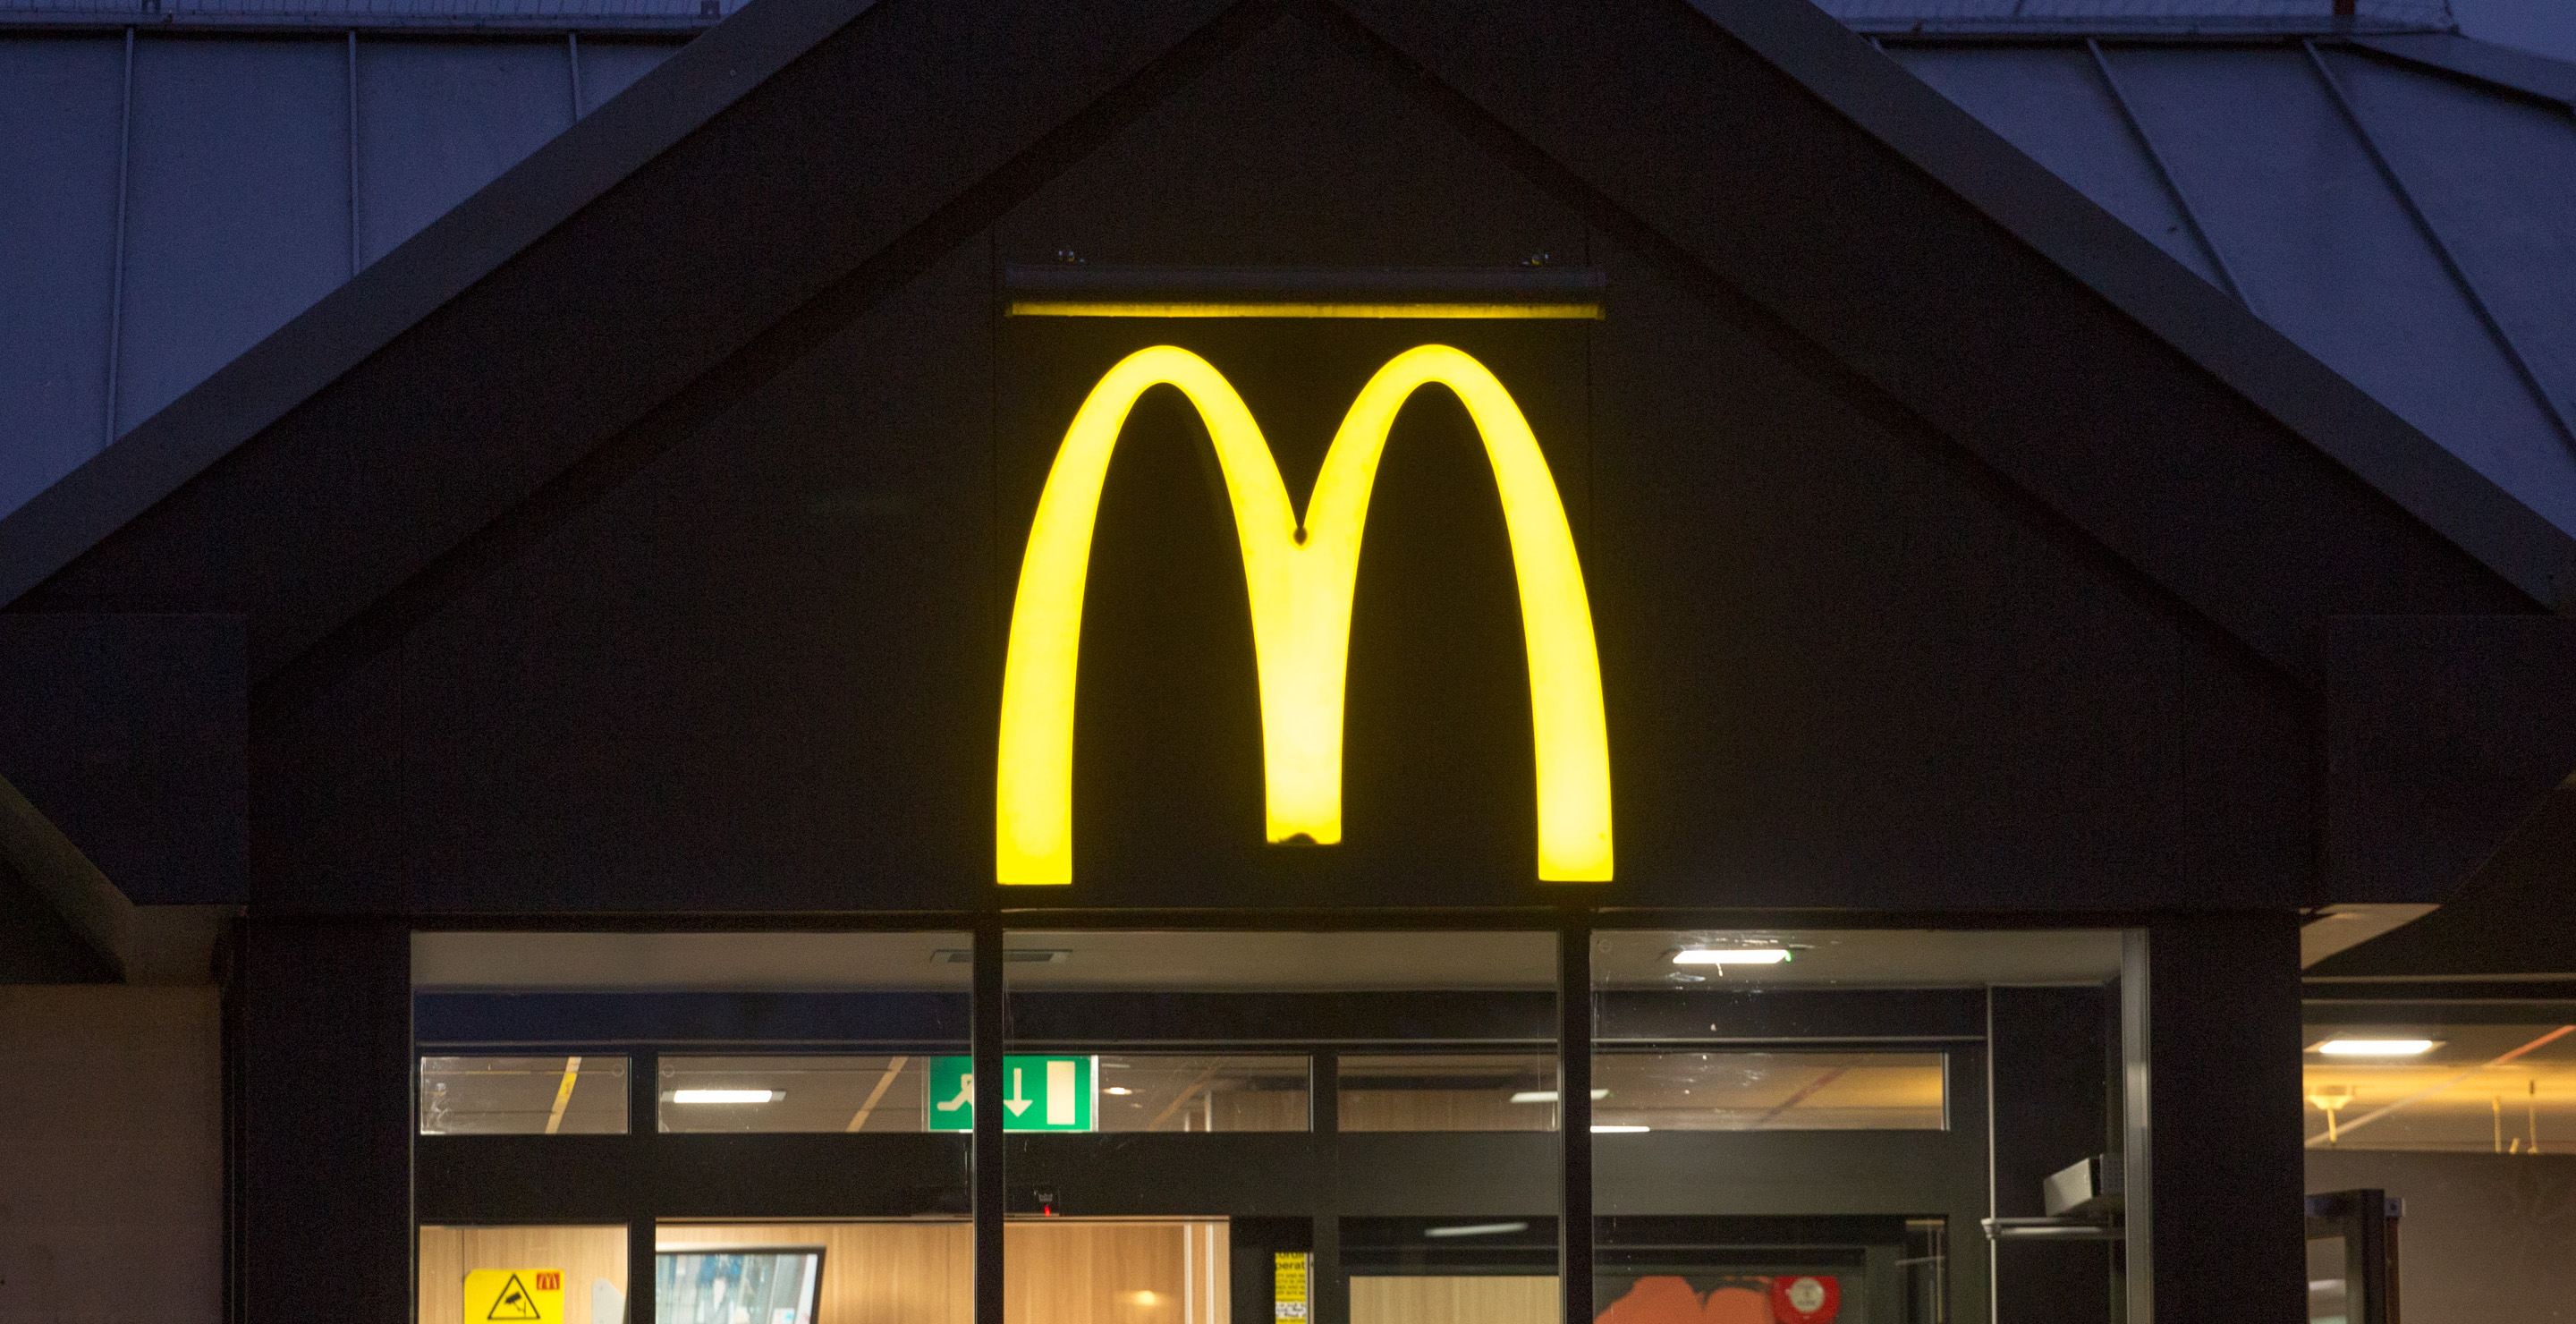 mcdonalds-upgrades-to-a-5-menu-and-people-are-outraged